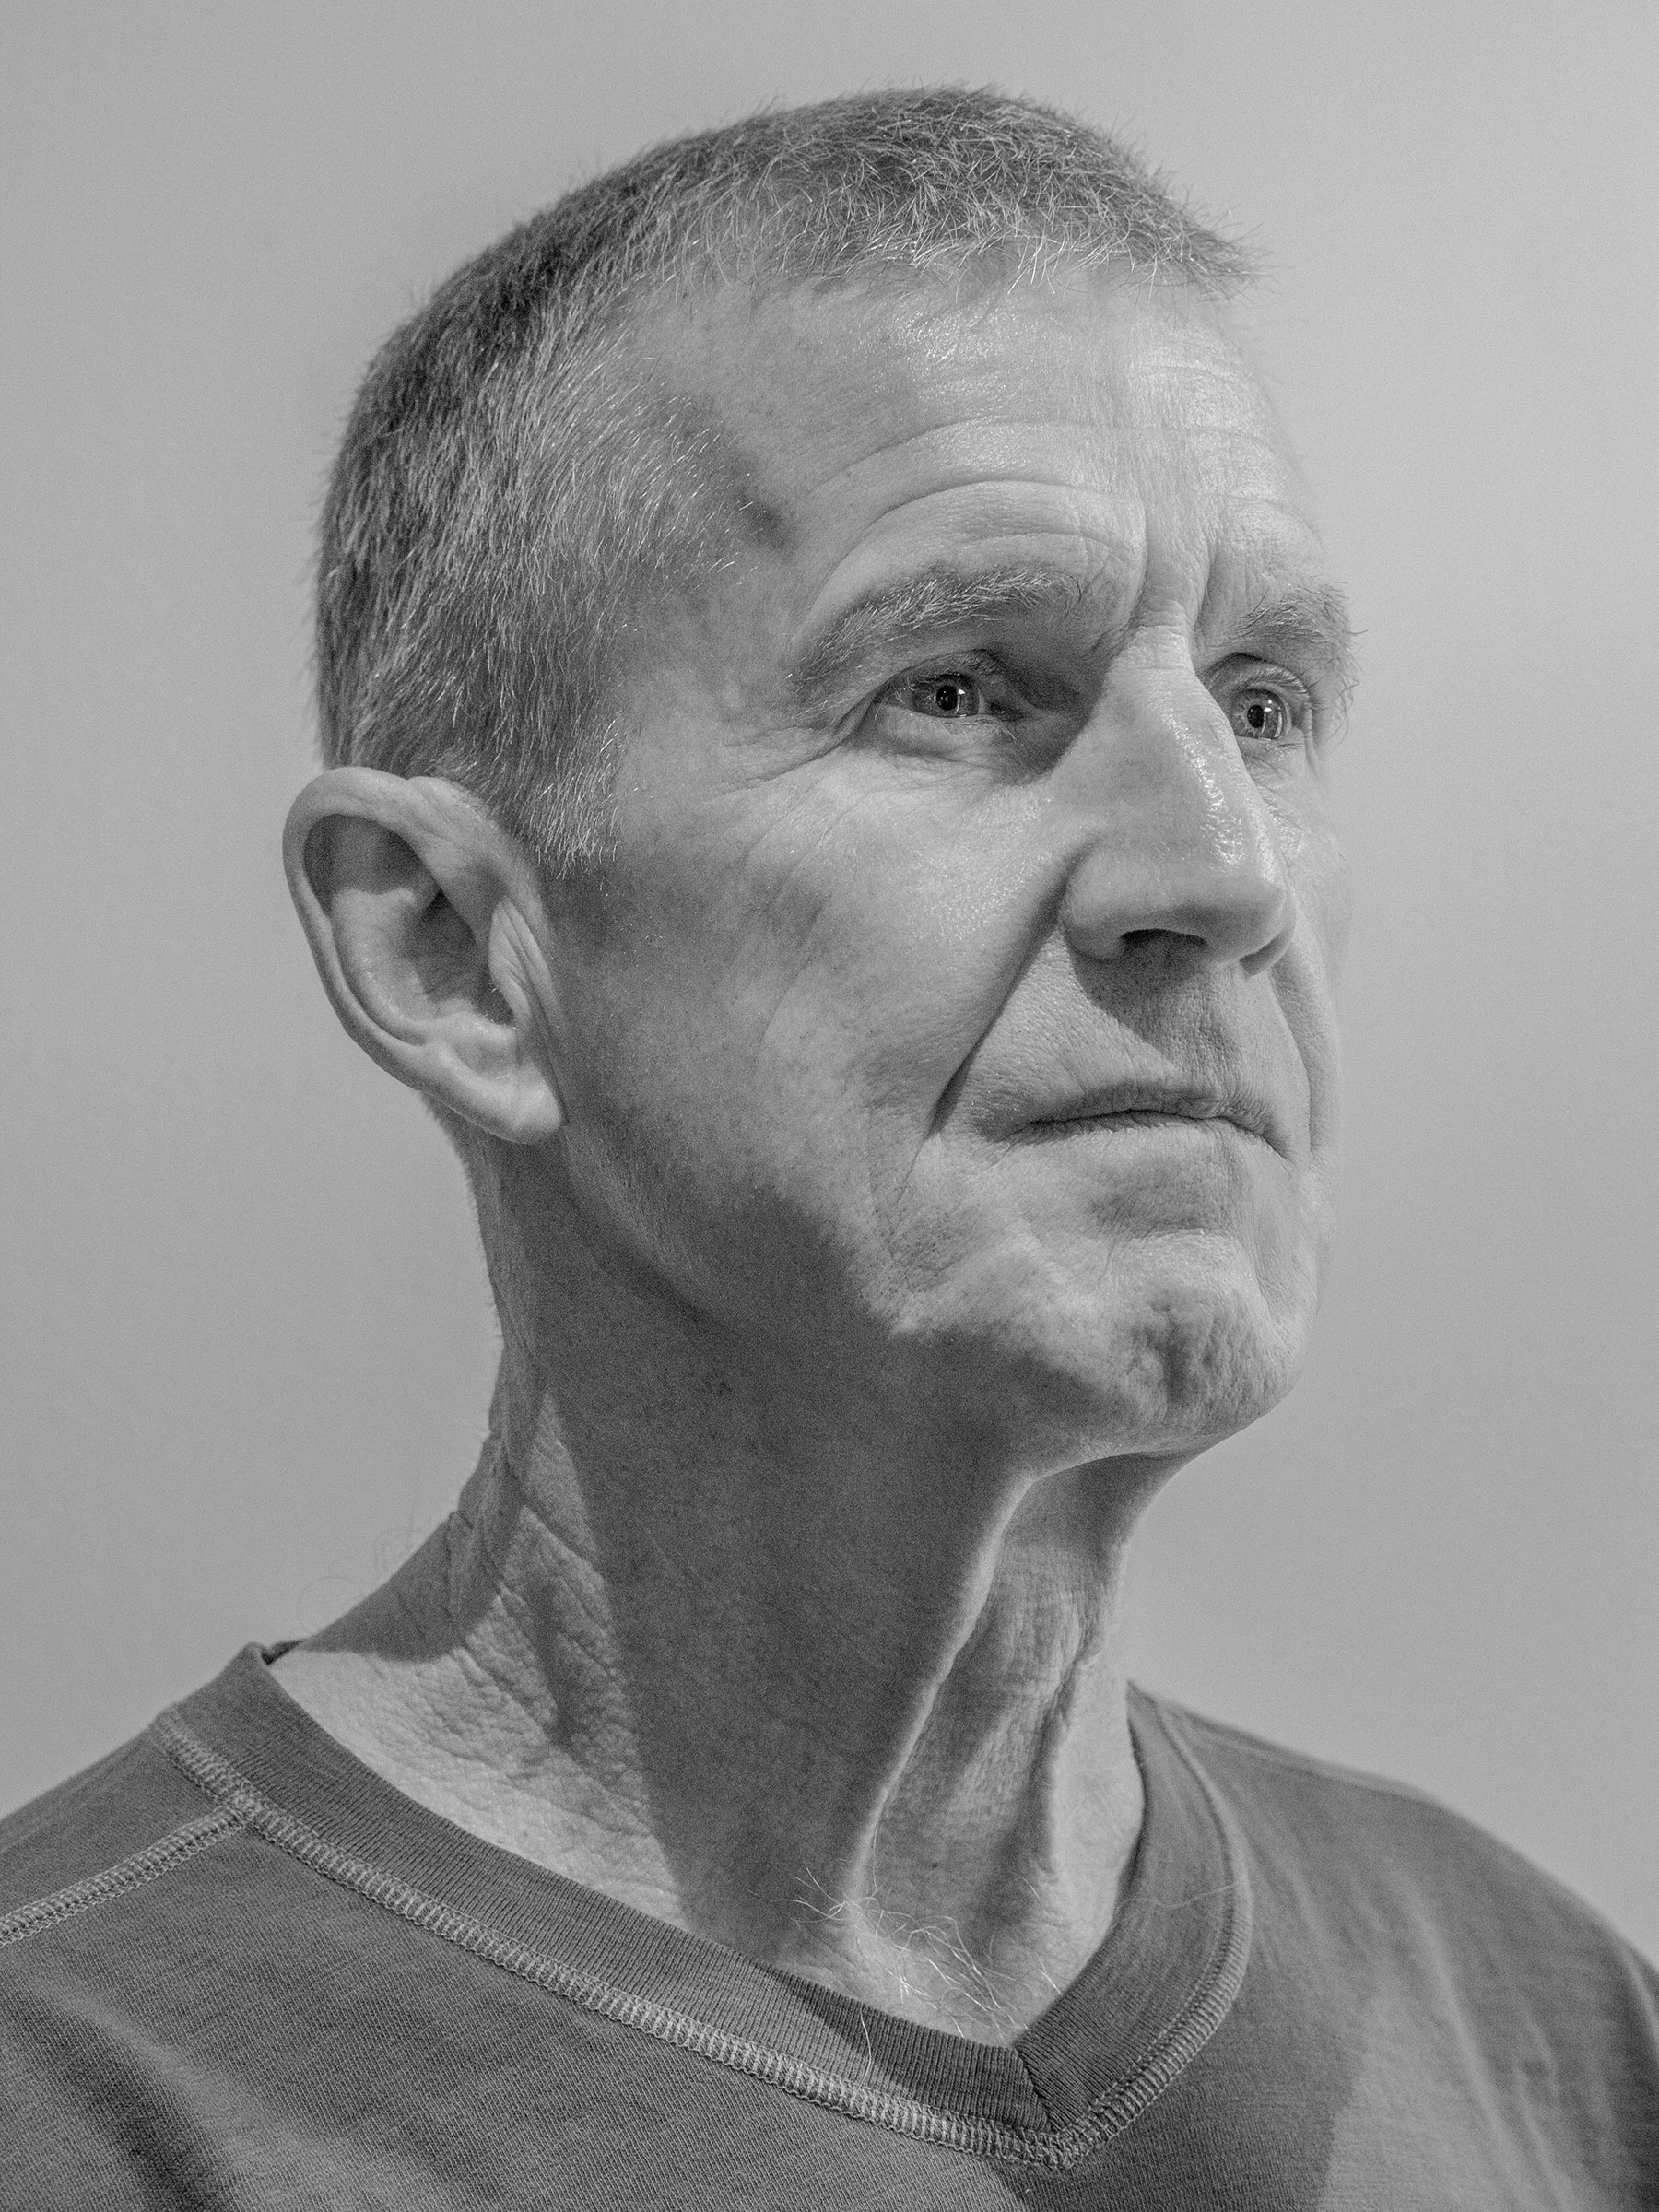 Gen. Stanley McChrystal photographed in Alexandria, Va. on Oct. 9, 2021. (Peter van Agtmael—Magnum Photos for TIME)